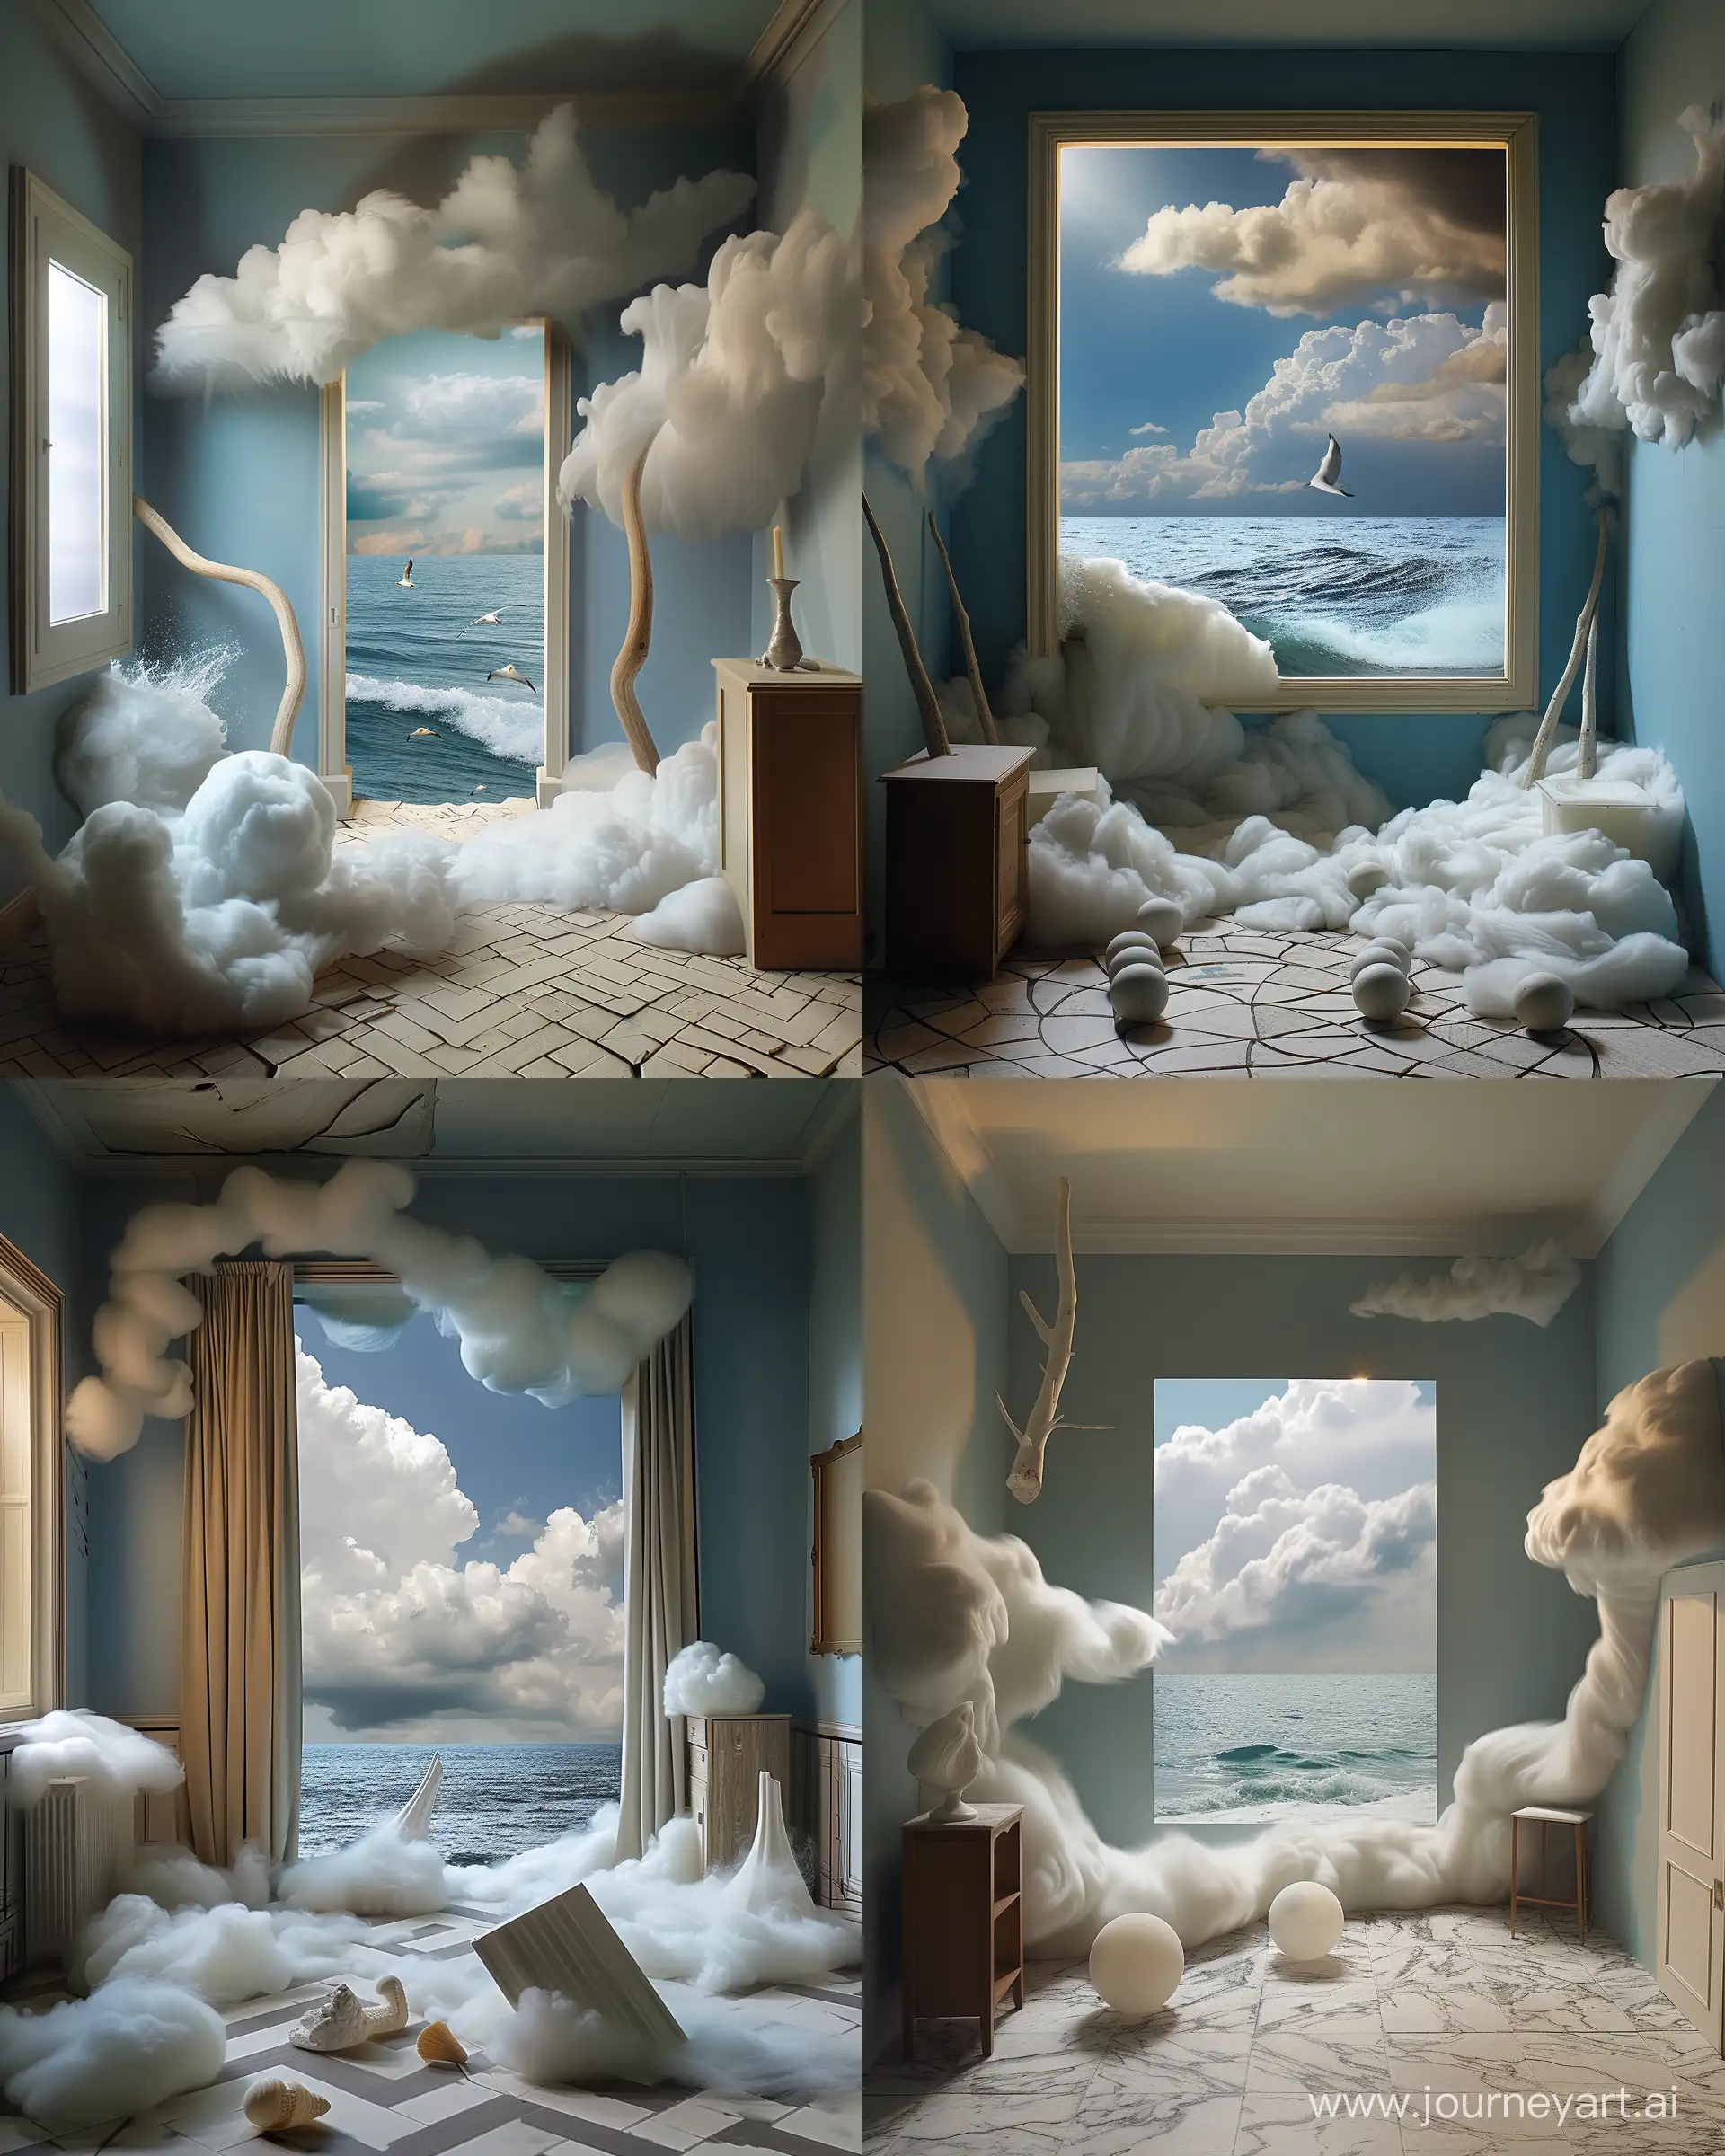 Surrealistic-Sea-and-Cloud-Collision-in-Room-Sculpture